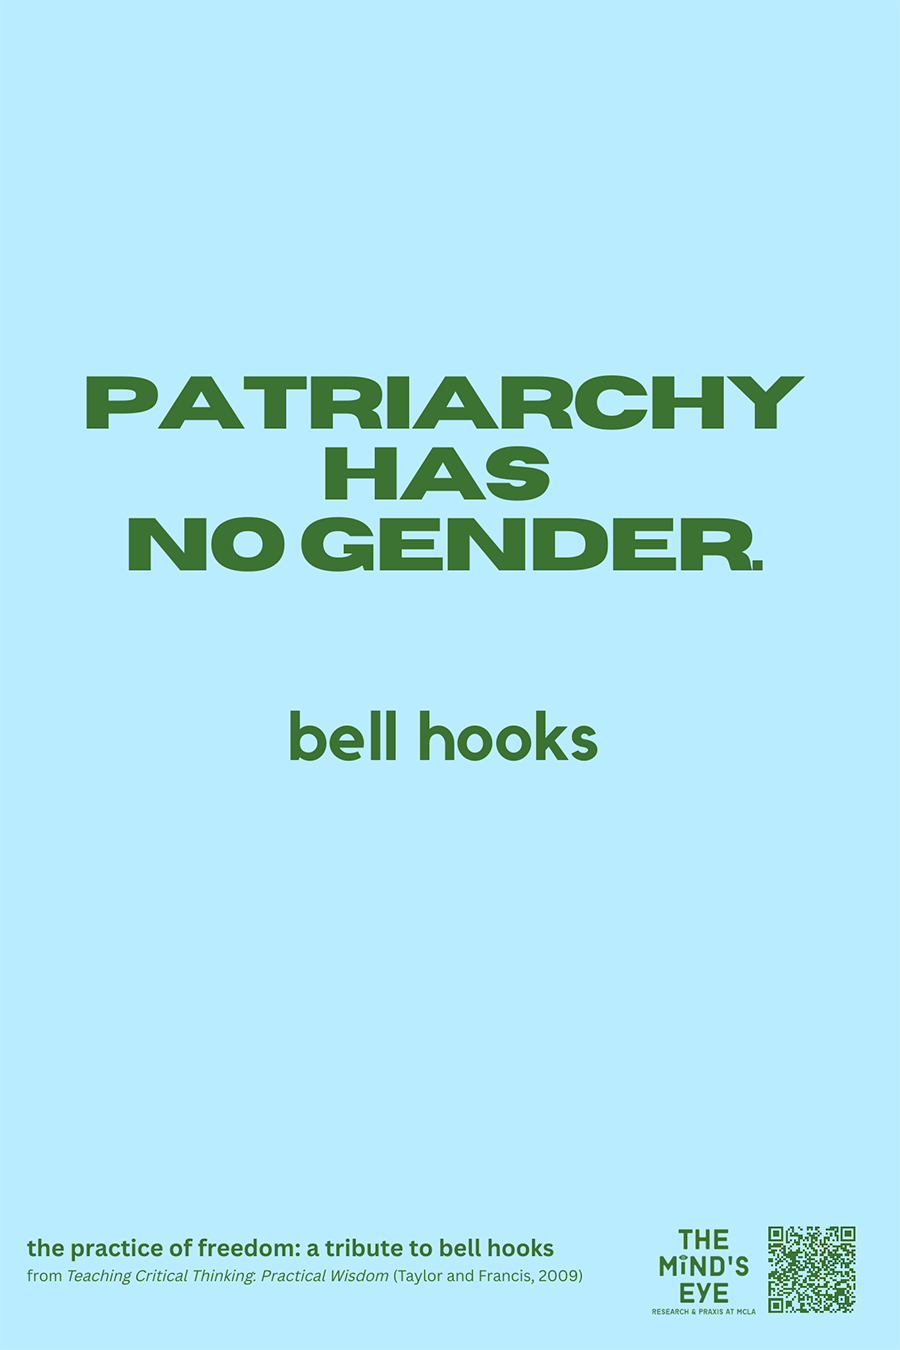 Patriarchy has no gender. bell hooks. the practice of freedom: a tribute to bell hooks. from Teaching Critical Thinking. Practical Wisdom (Taylor and Francis 2009). The Mind's Eye. Research & Praxis at MCLA.